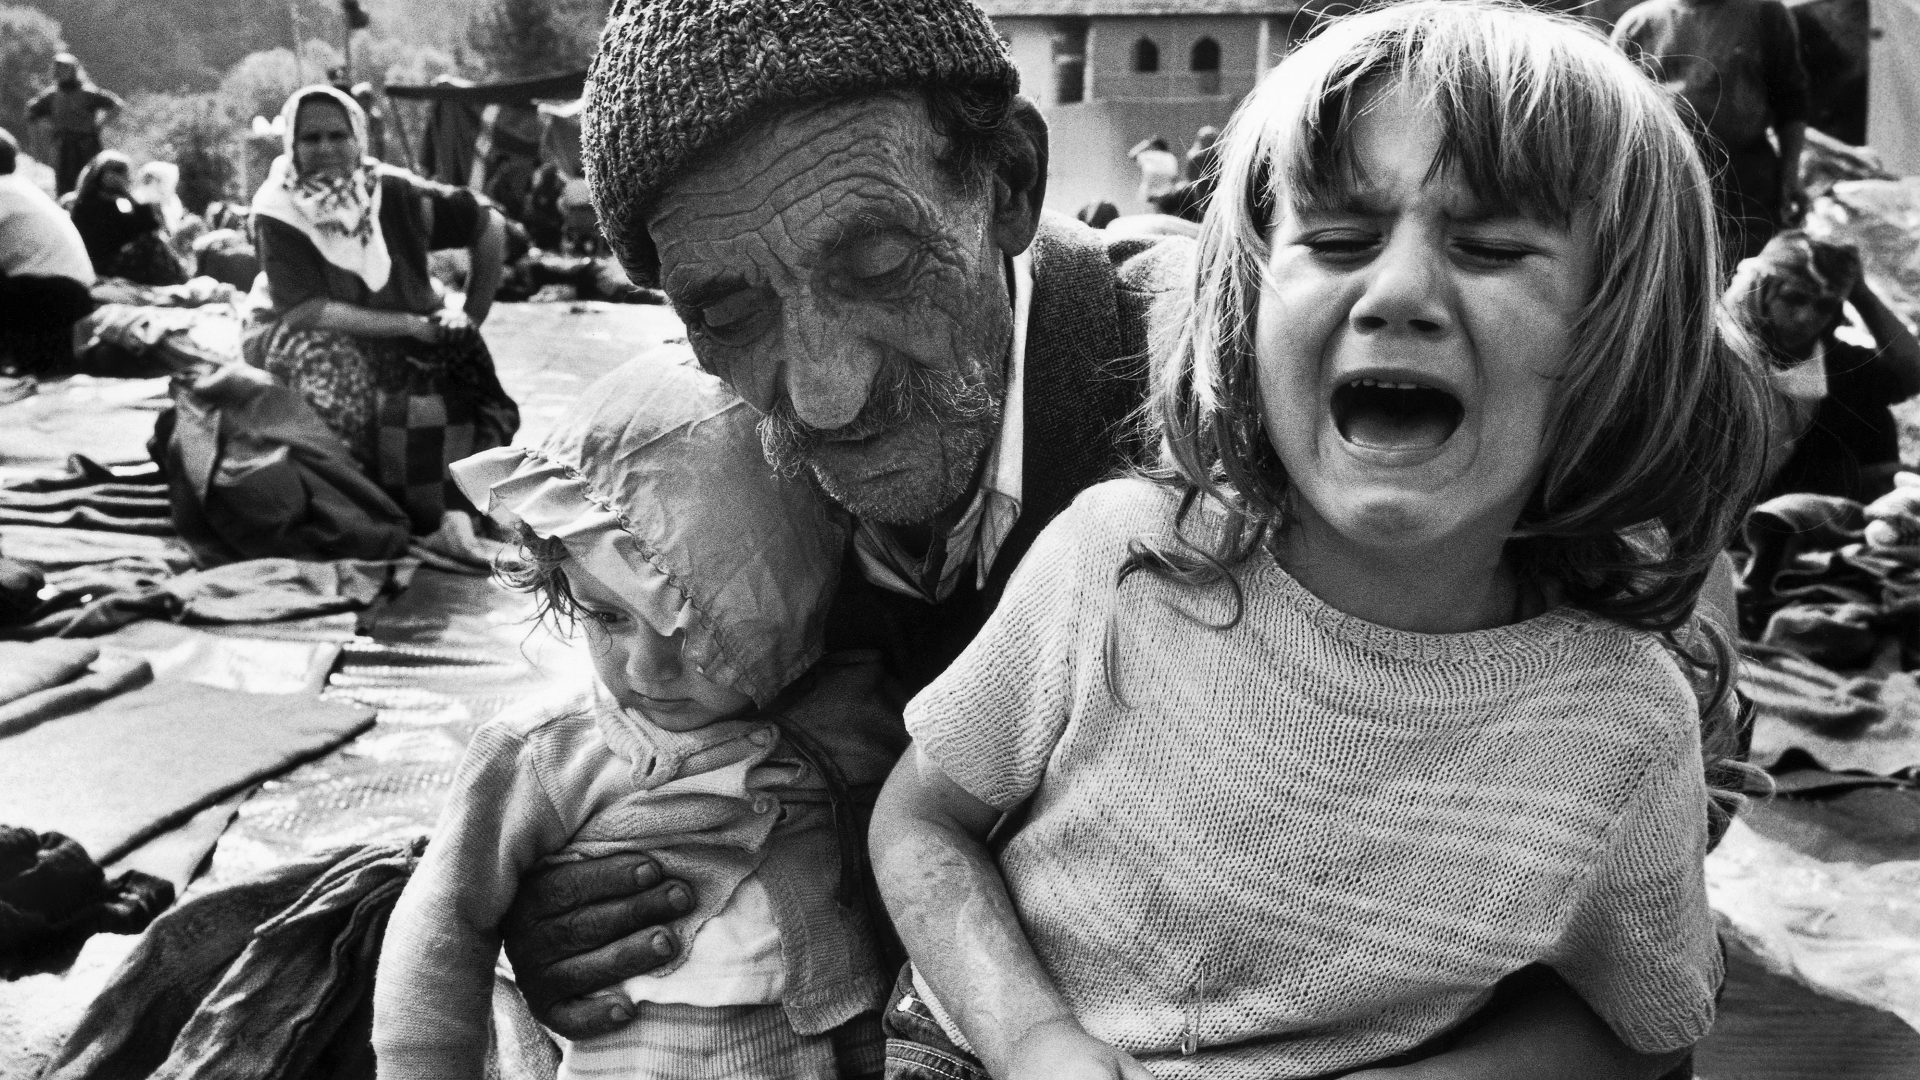 A Bosnian man holds his exhausted granddaughters after a long journey on foot to a UN refugee 
camp at Kladanj after being forced to flee their home amid Serbian ethnic cleansing. The girls’ parents had not been found. Photo: David Turnley/Corbis/VCG/
Getty